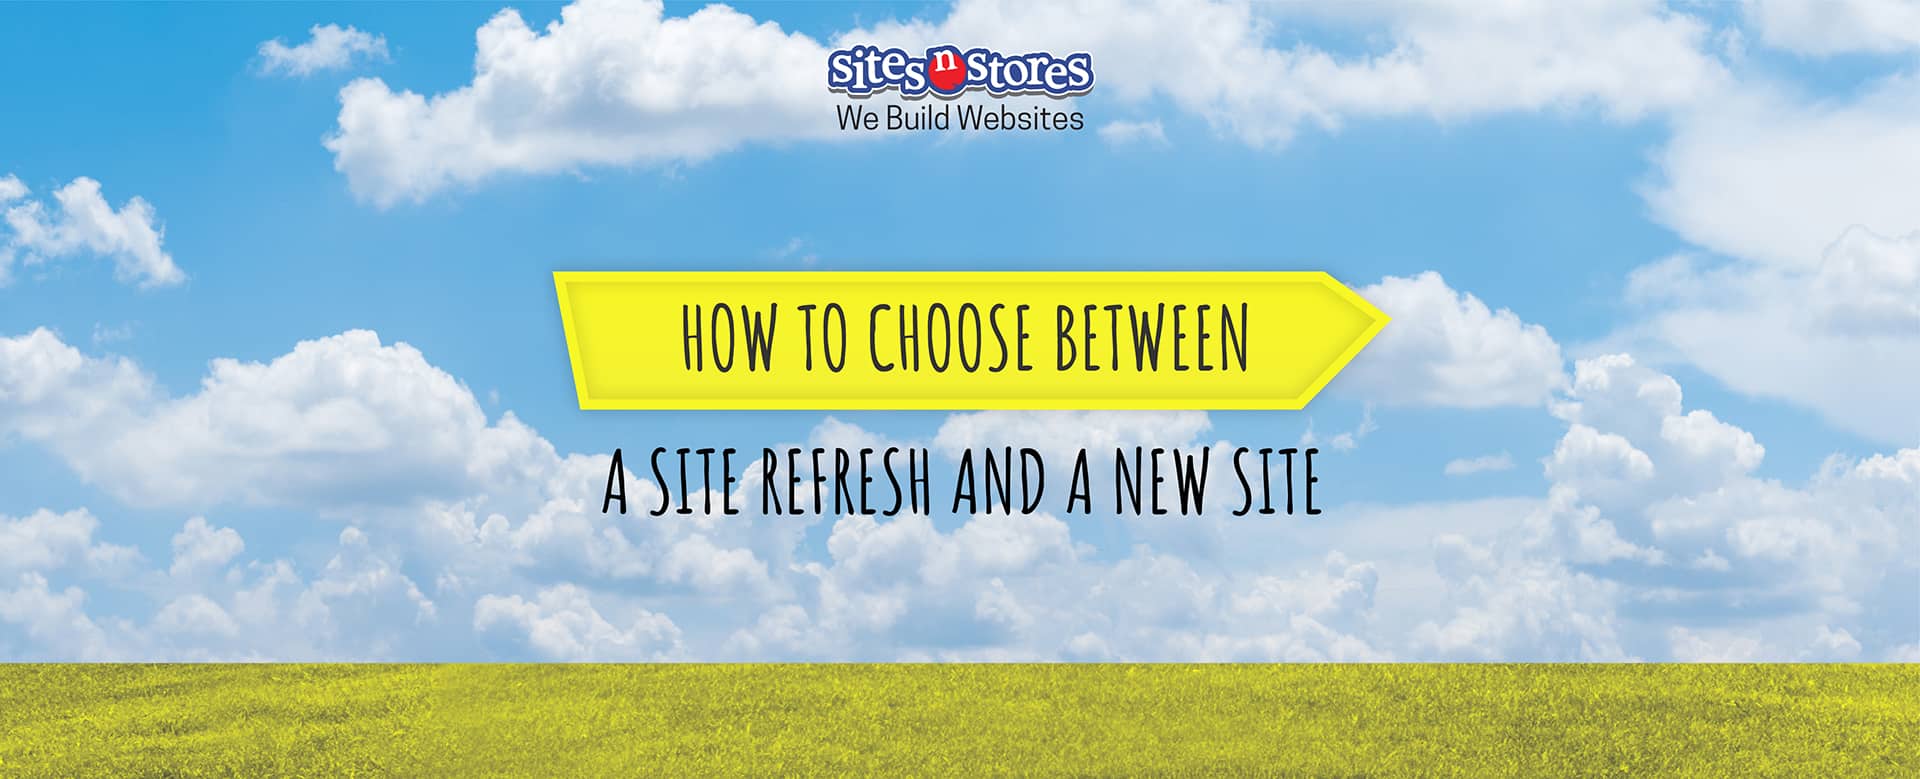 How To Choose Between A Site Refresh and A New Site